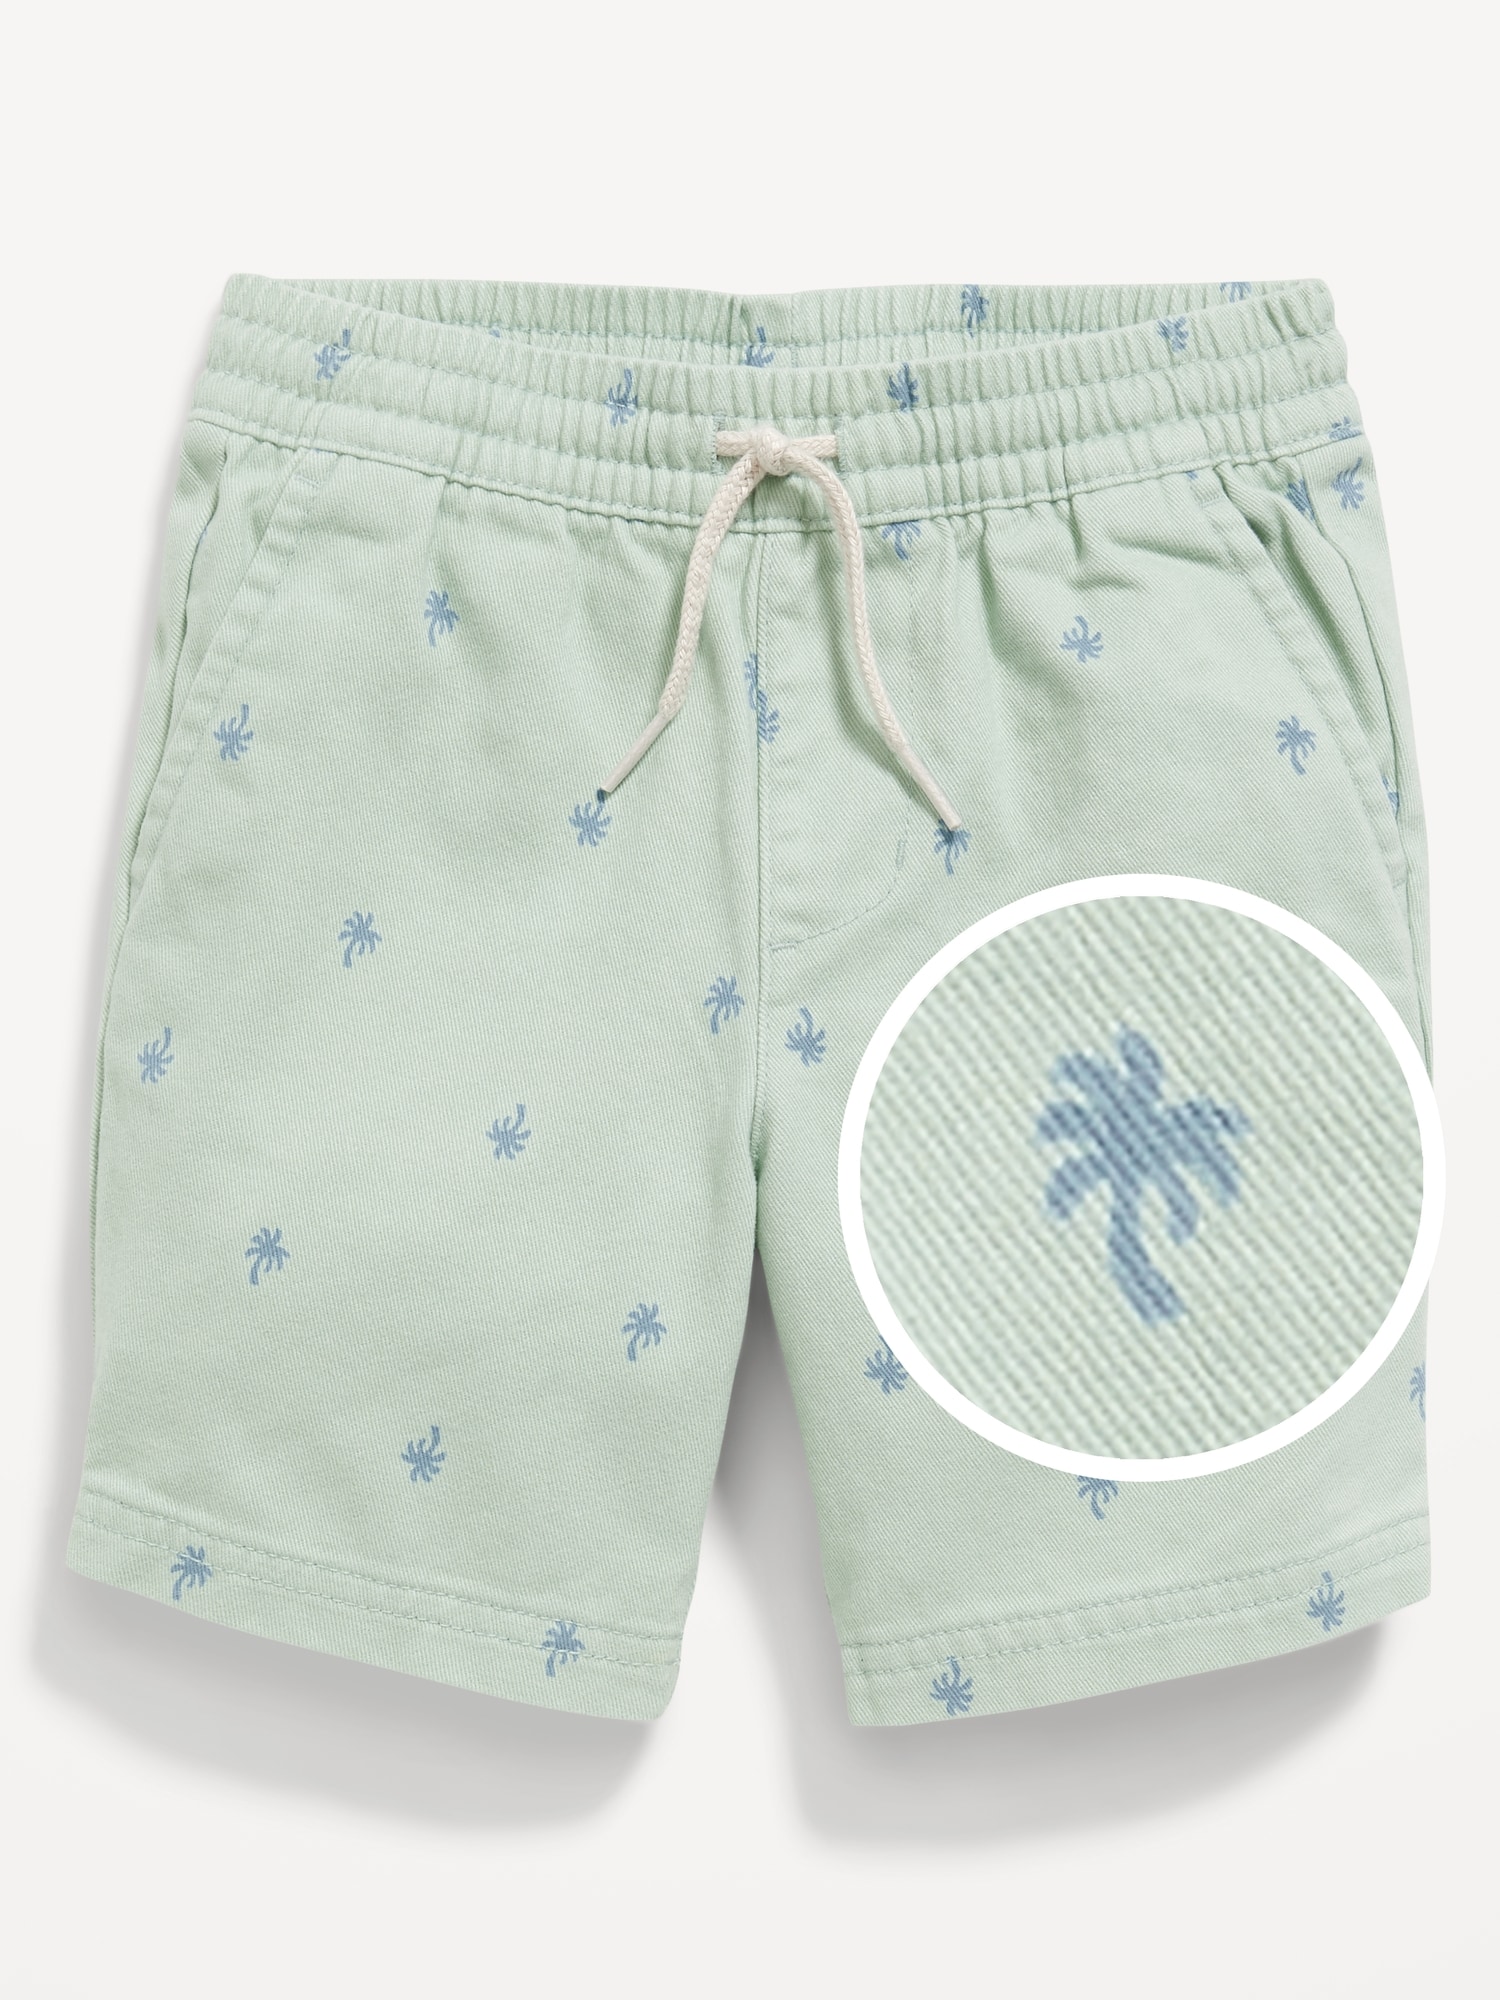 Functional-Drawstring Twill Shorts for Toddler Boys - Old Navy